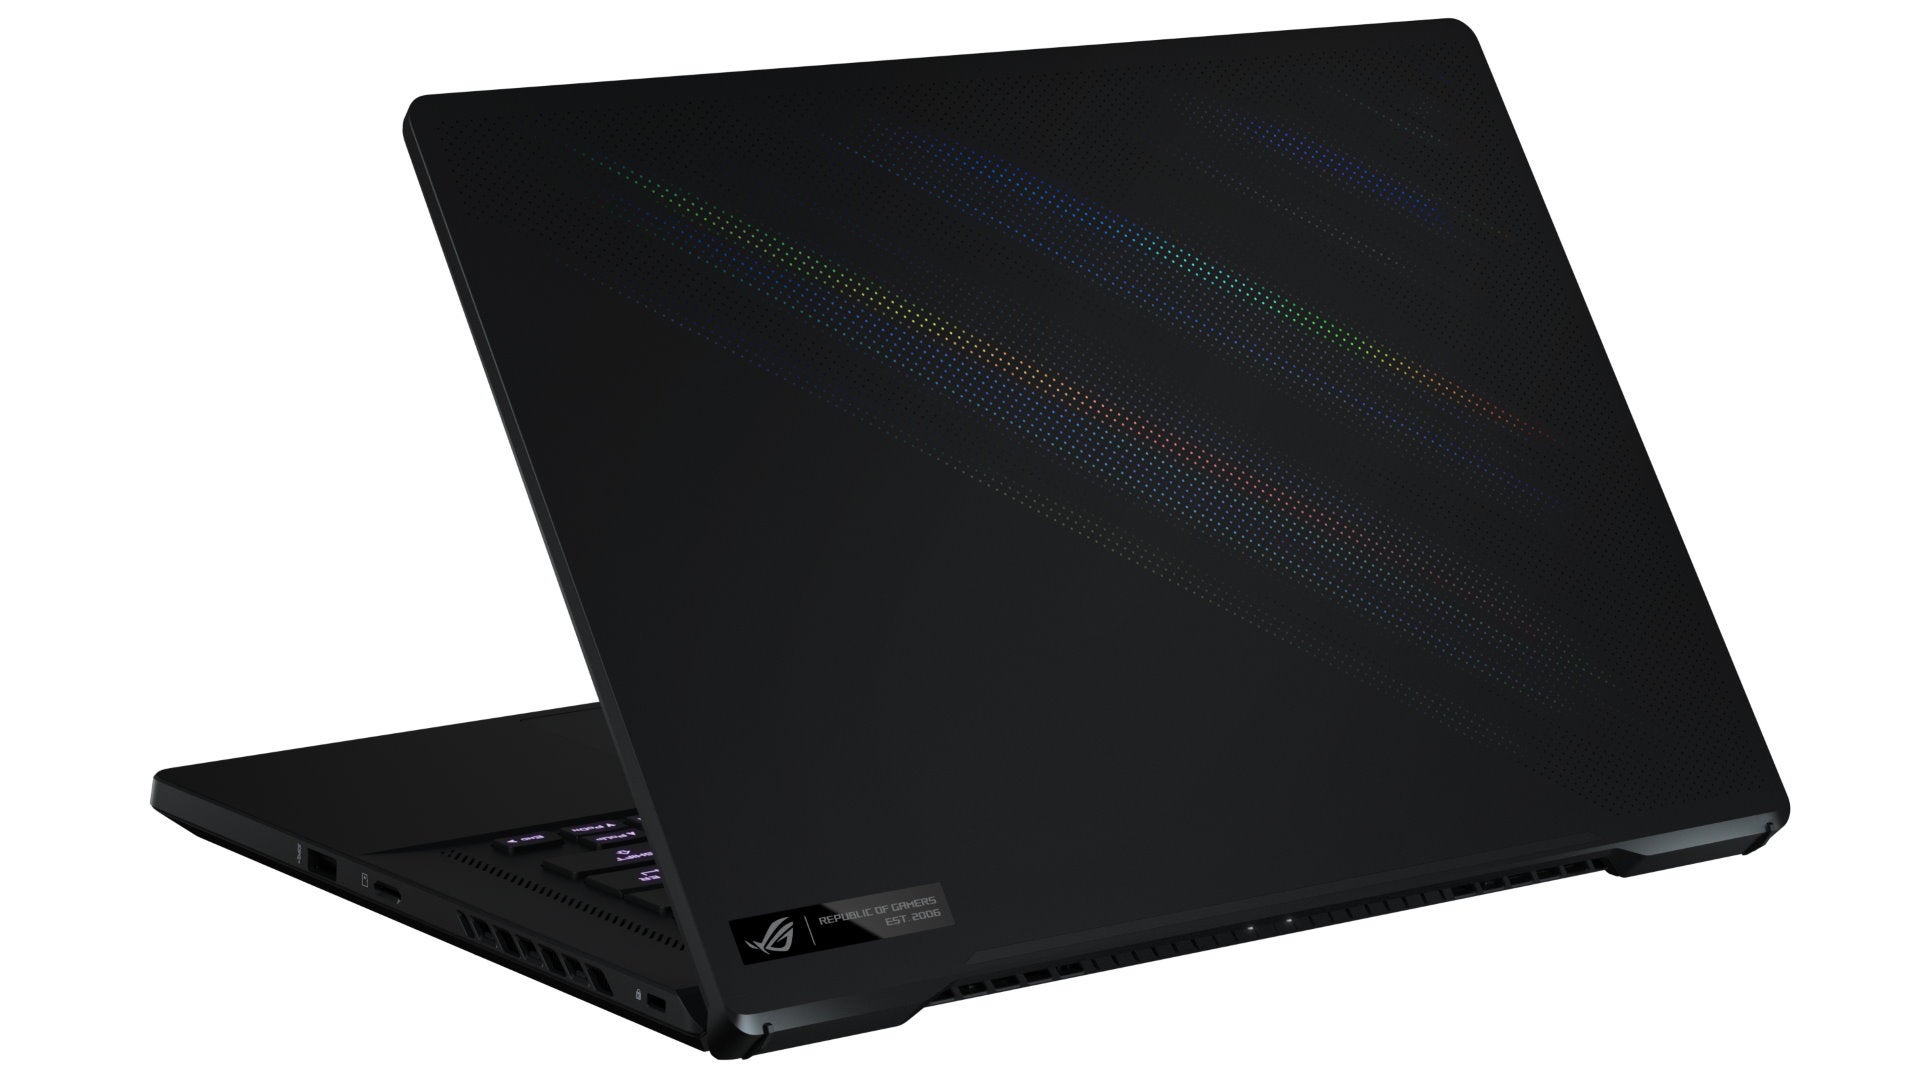 A photo of the Asus ROG Zephyrus M16 gaming laptop